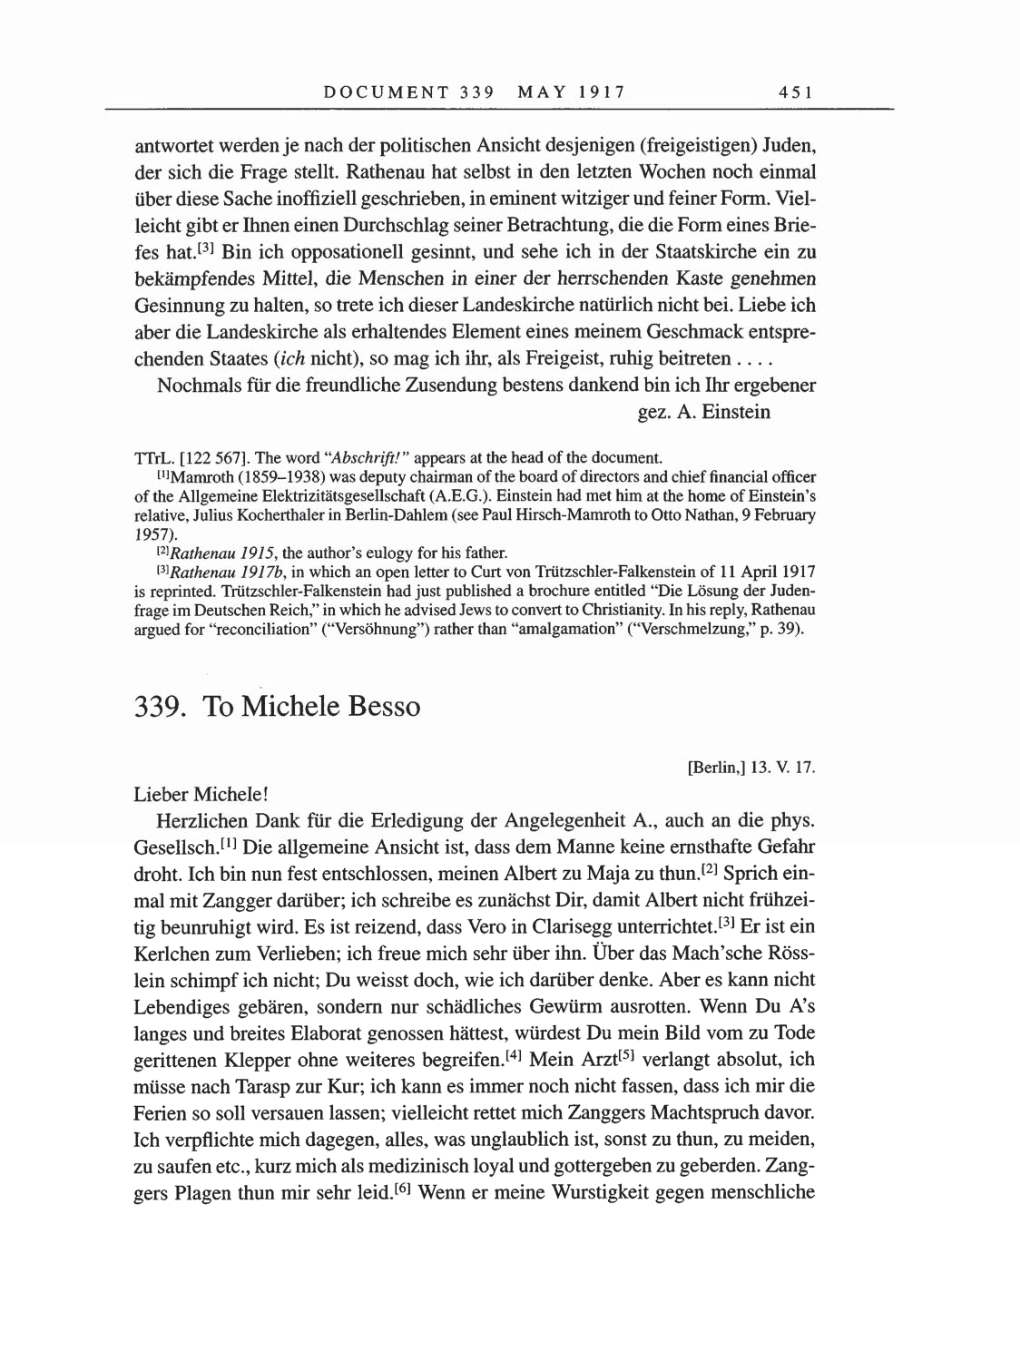 Volume 8, Part A: The Berlin Years: Correspondence 1914-1917 page 451